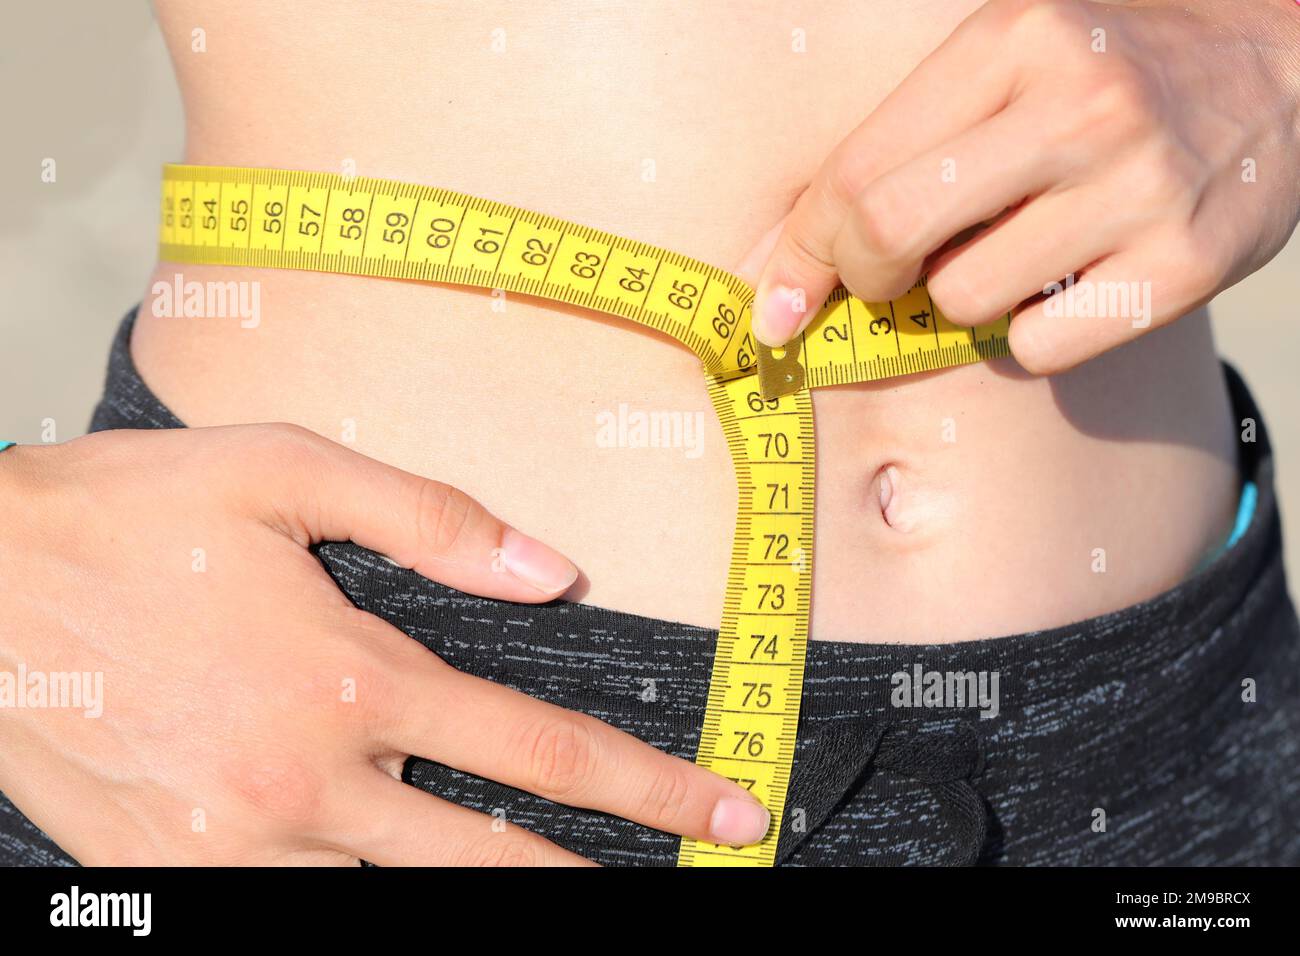 https://c8.alamy.com/comp/2M9BRCX/young-girl-belly-waist-measurement-with-tape-measure-and-measure-in-centimeters-2M9BRCX.jpg